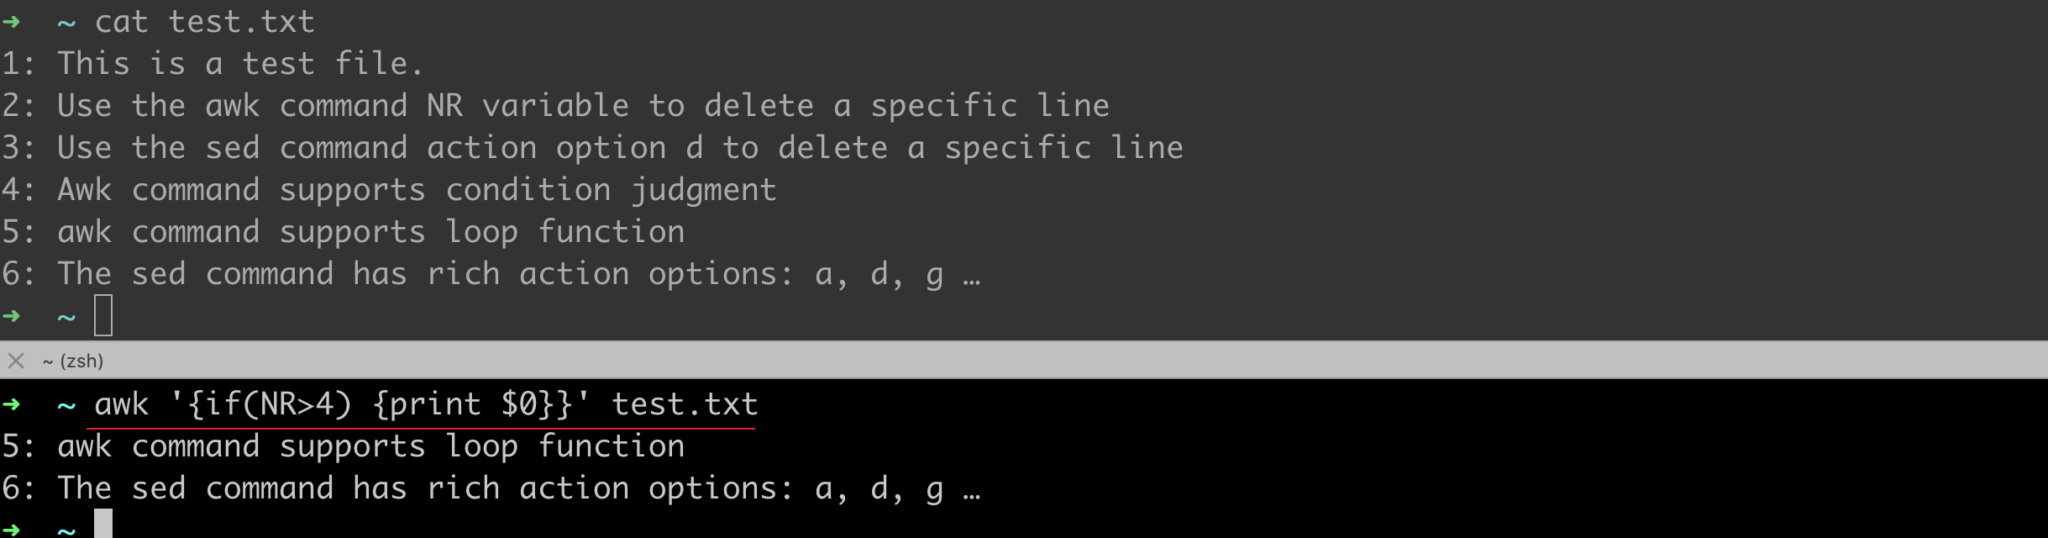 how-to-remove-lines-with-specific-line-number-from-text-file-with-awk-or-sed-in-linux-unix